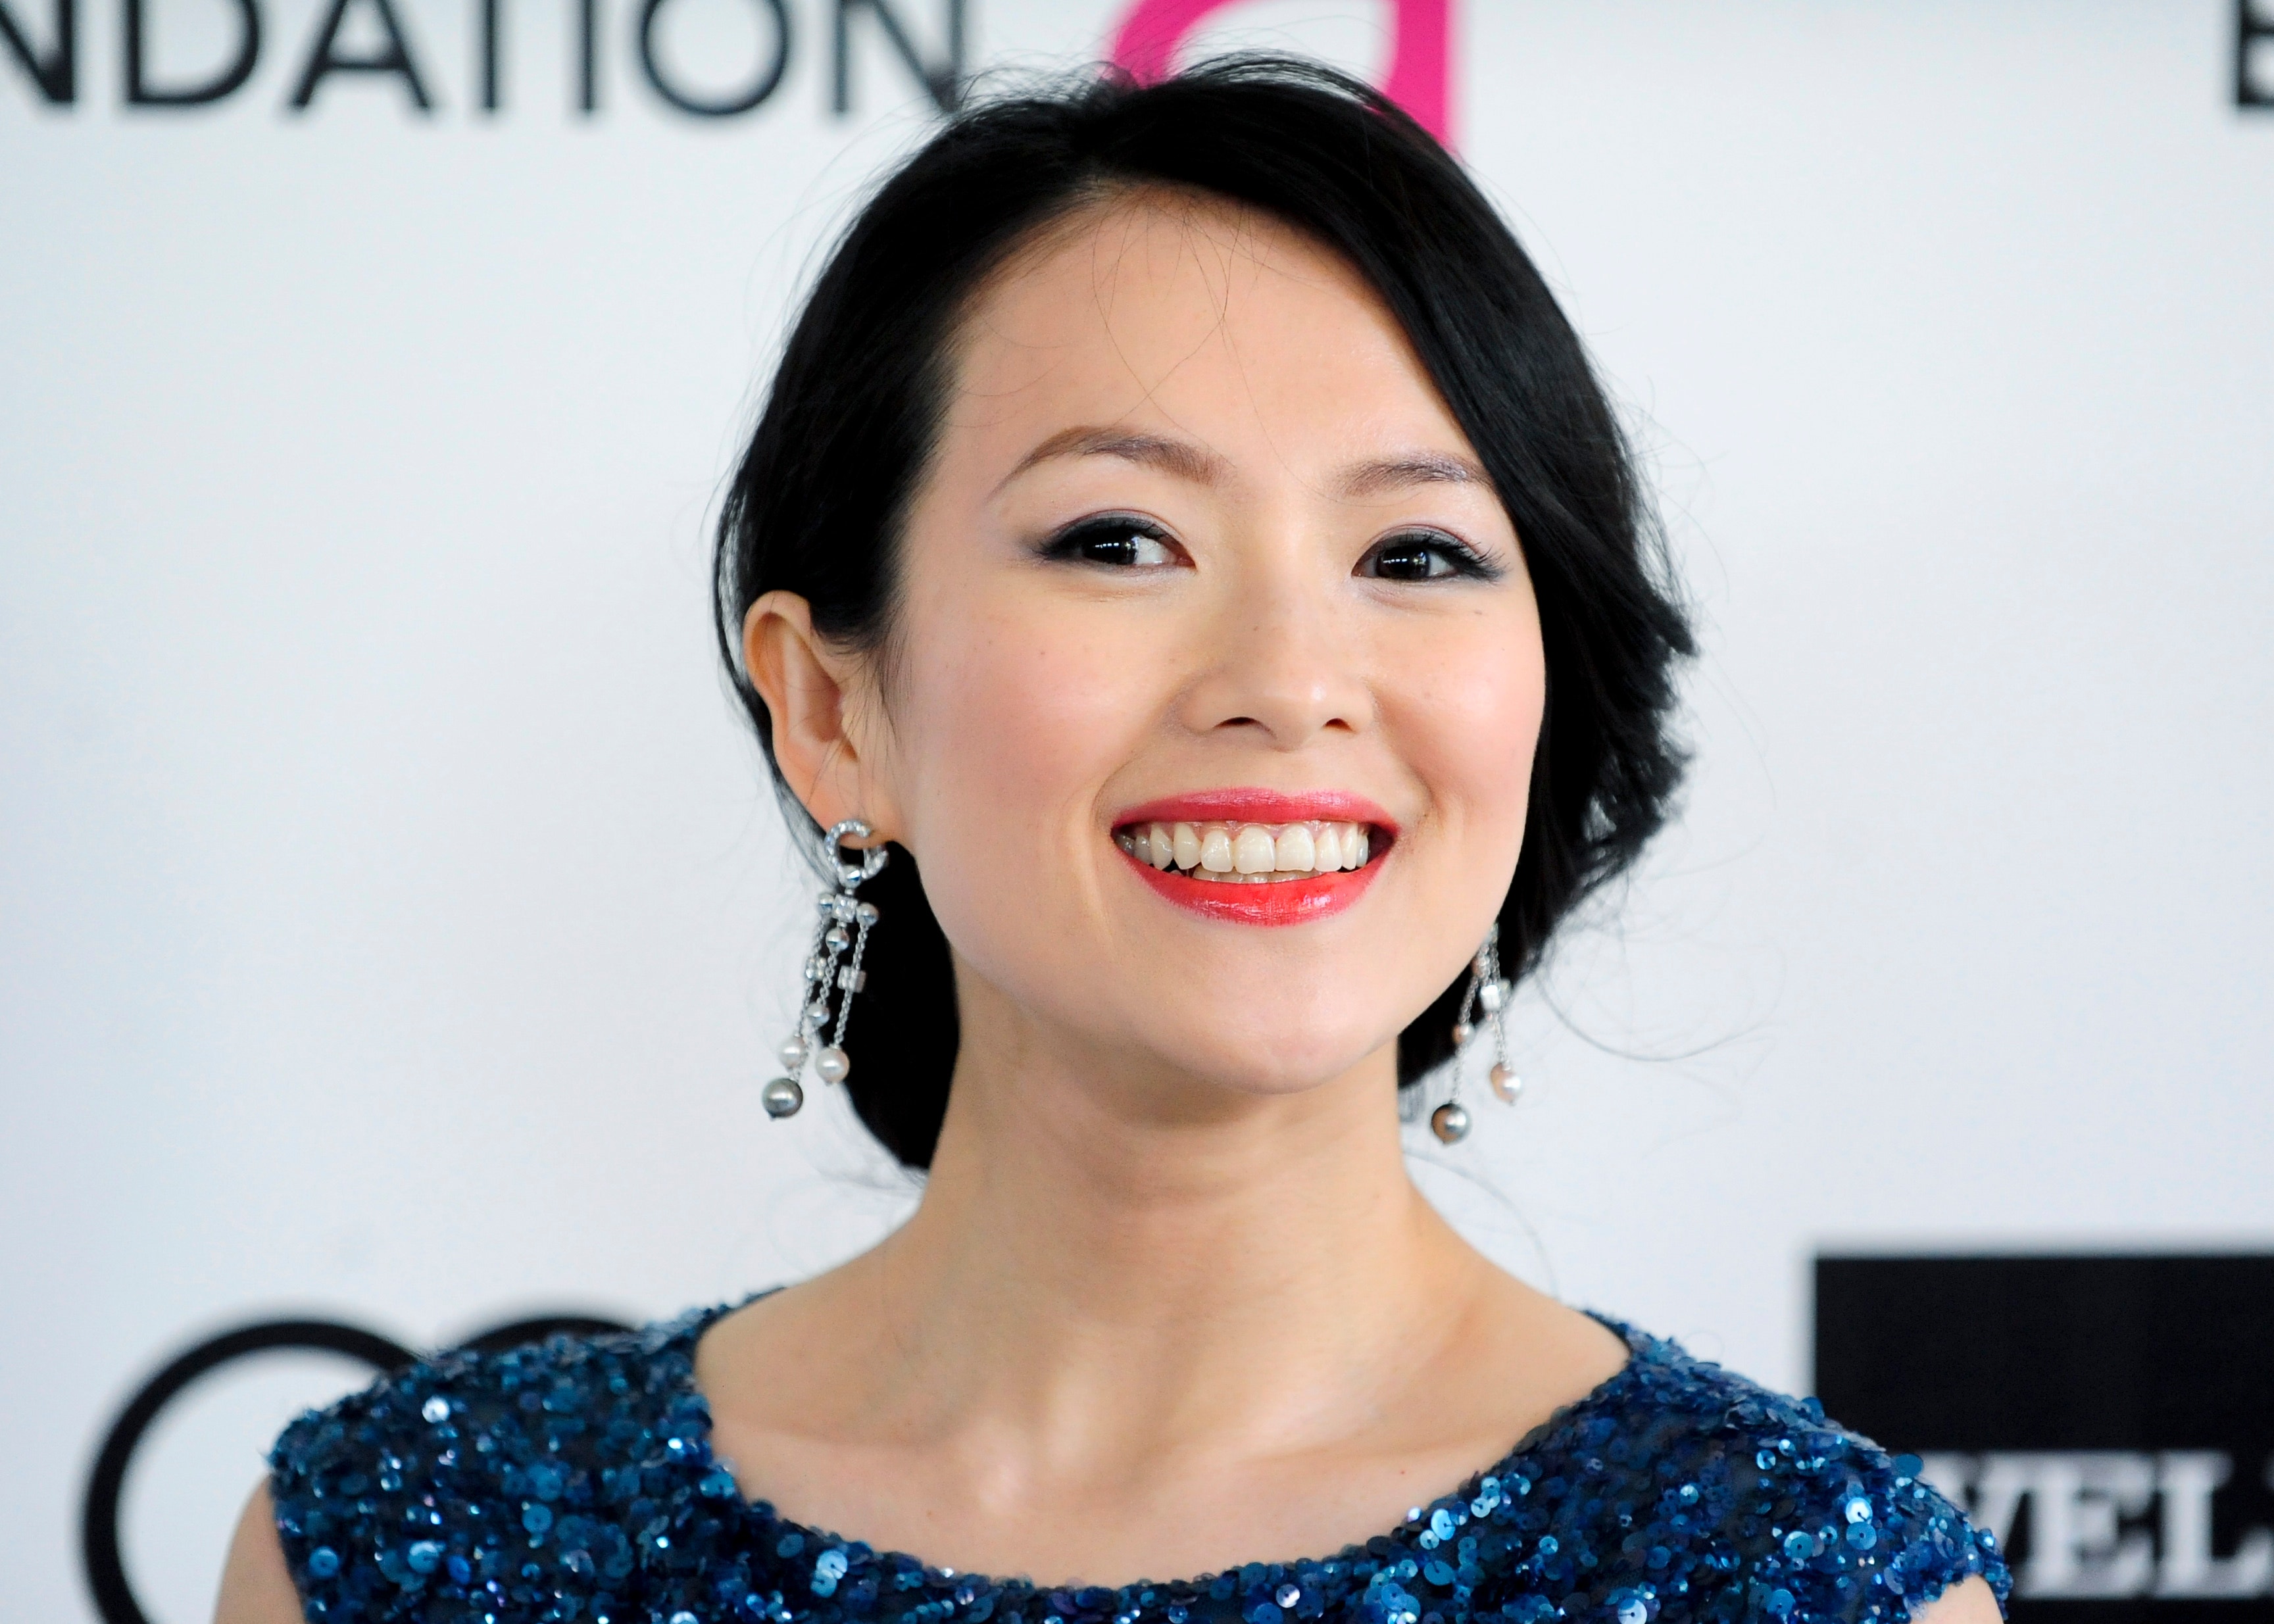 Crouching Tiger' actress Zhang Ziyi sues over prostitution reports.